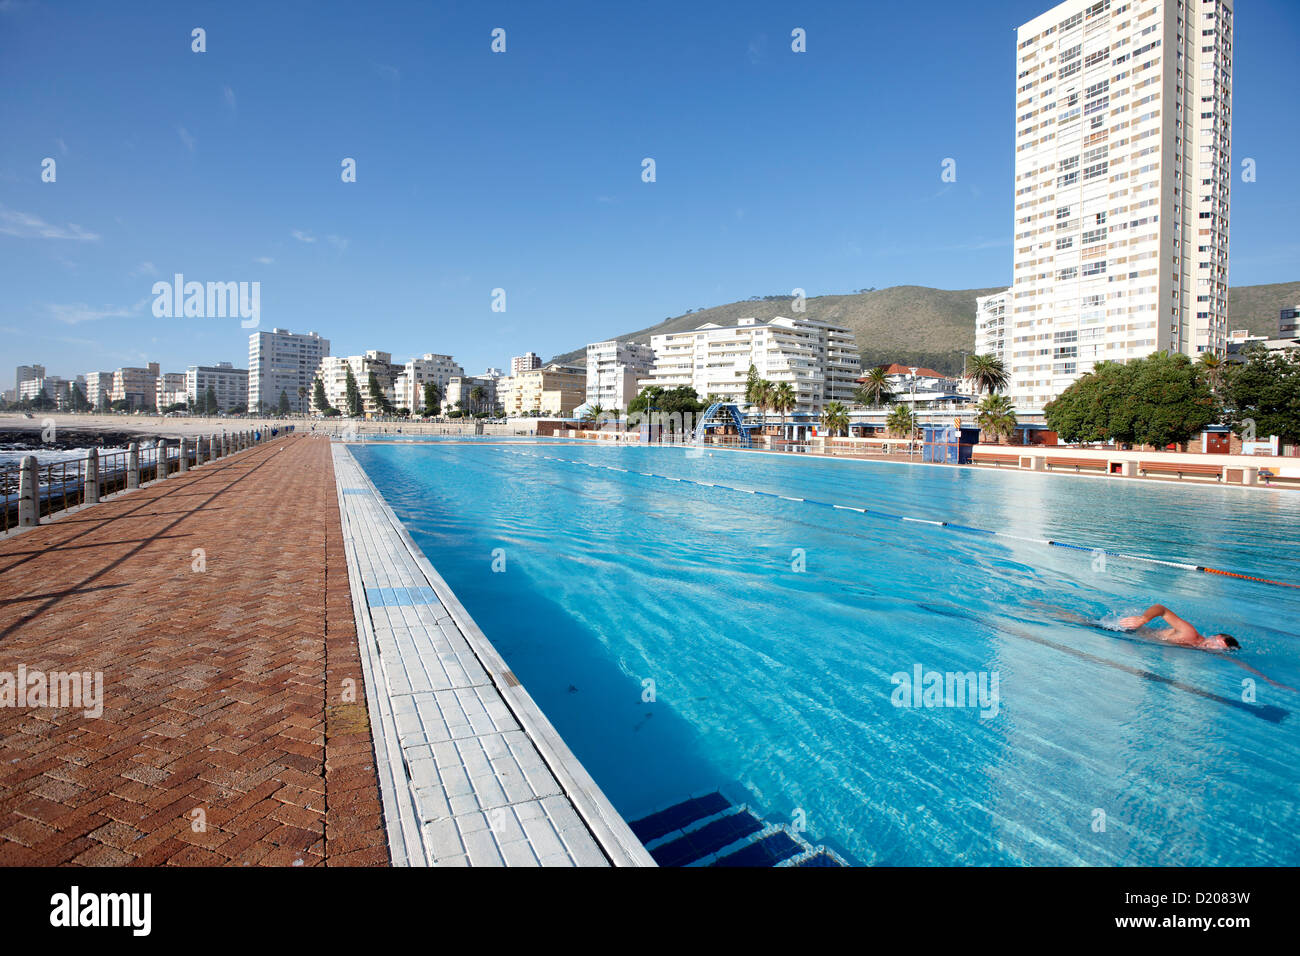 Swimmer in public pool Sea Point, Atlantic Seaboard, Cape Town, South Africa, Africa Stock Photo